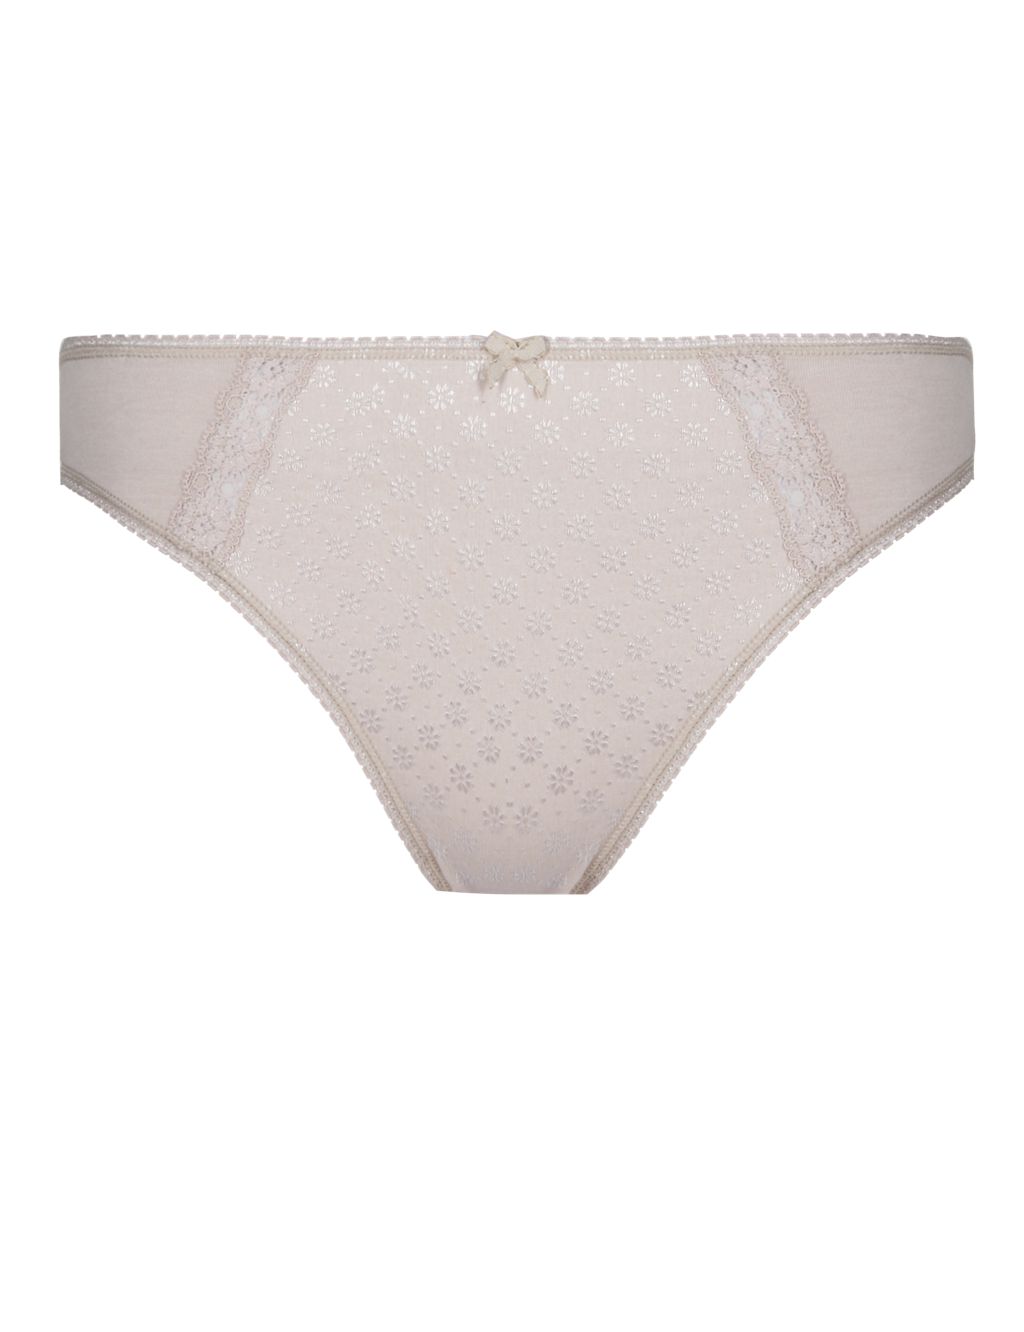 Cotton Rich Lace High Leg Knickers 1 of 4